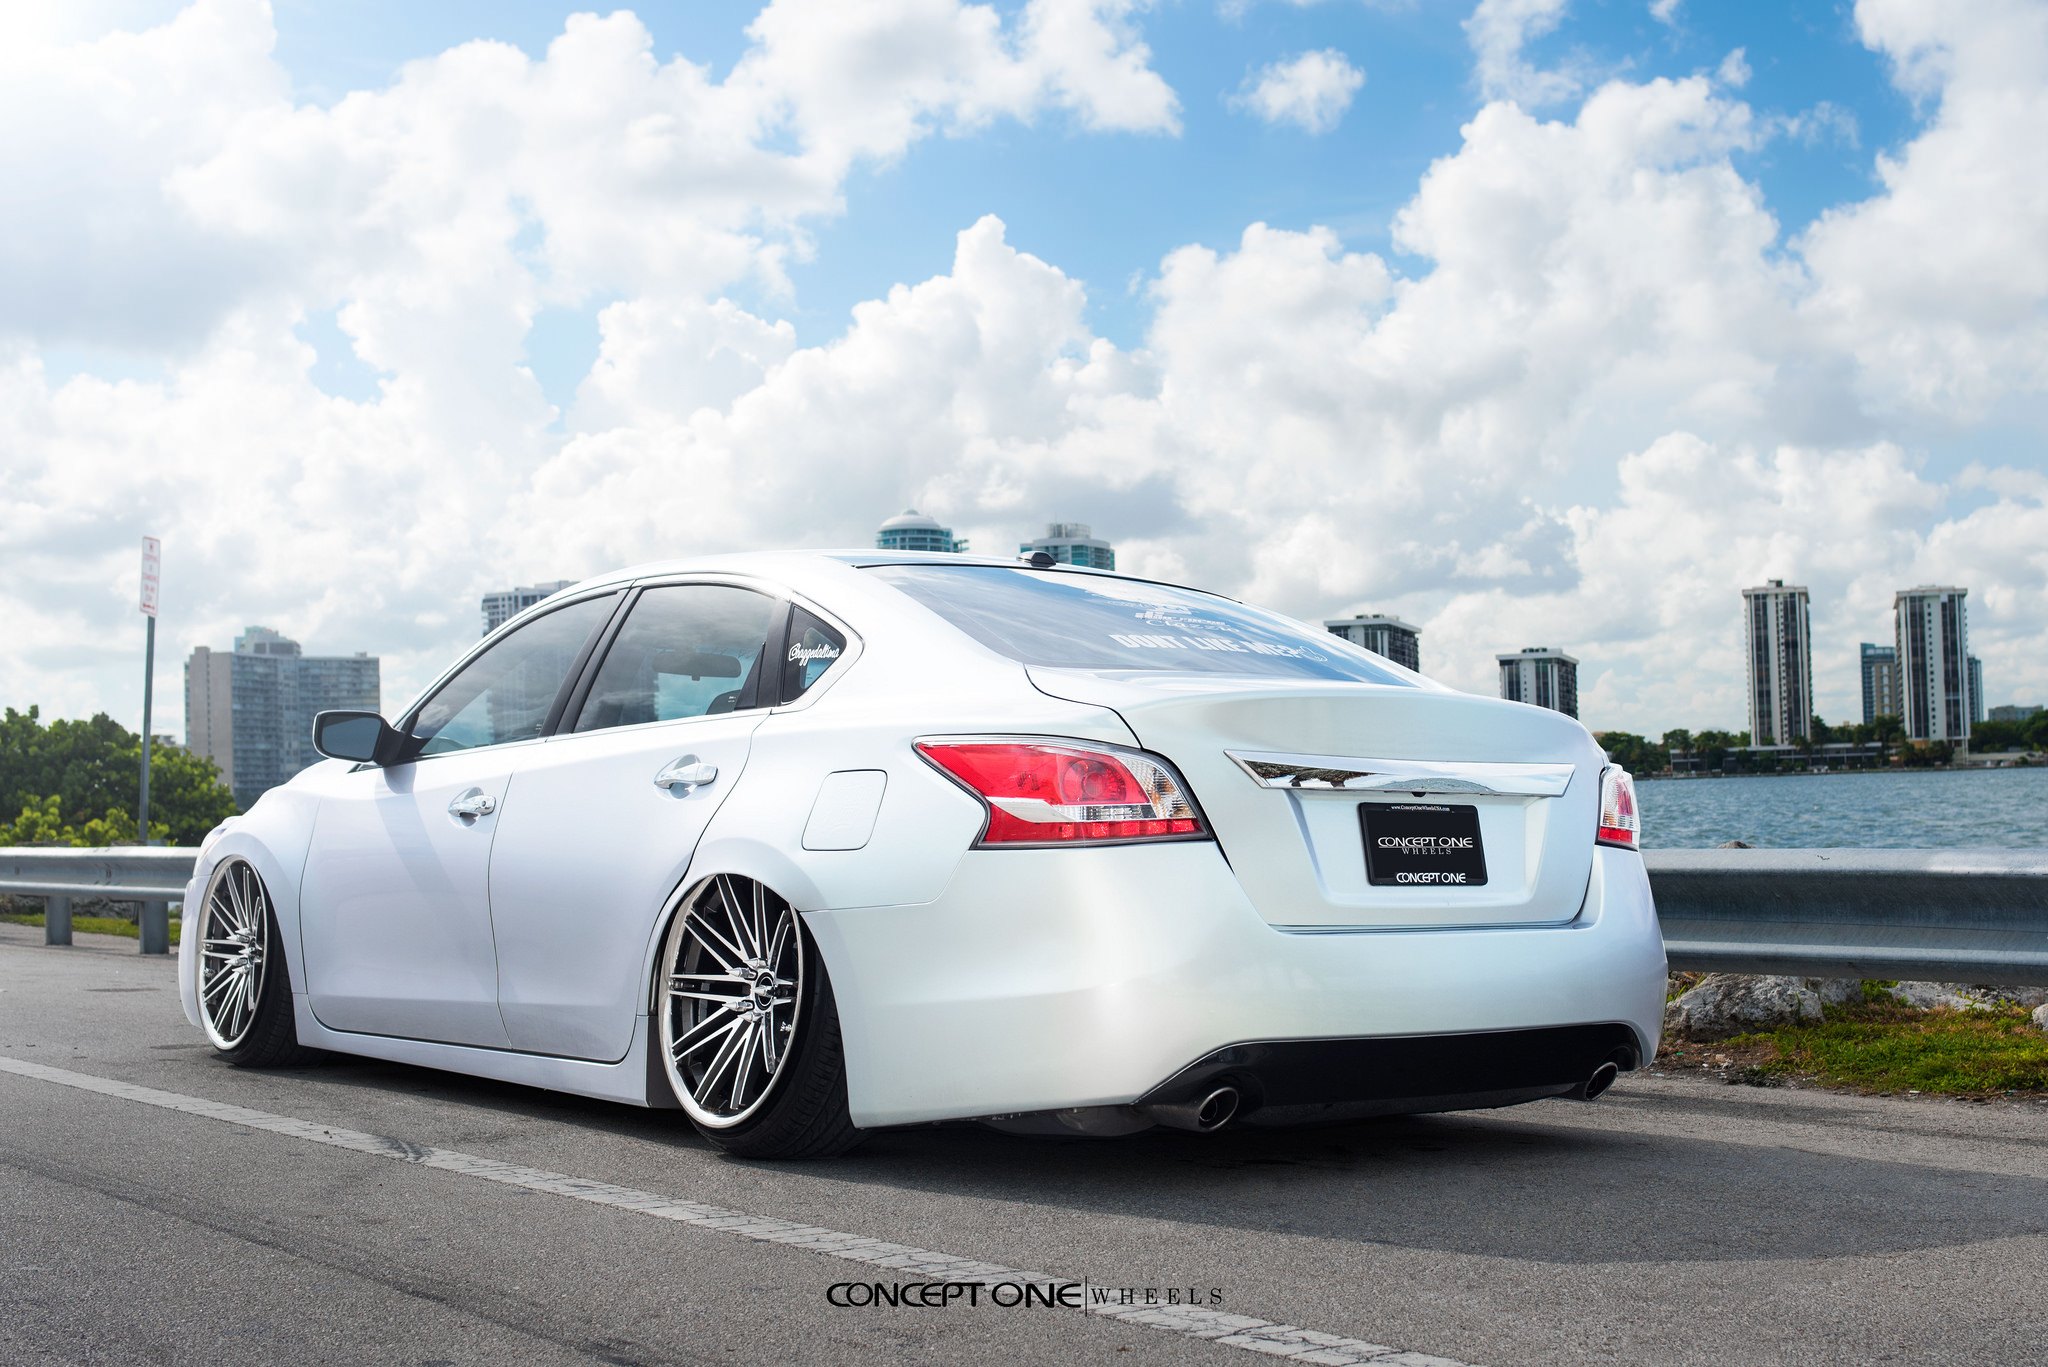 Custom Rear Diffuser on White Nissan Altima - Photo by Concept One